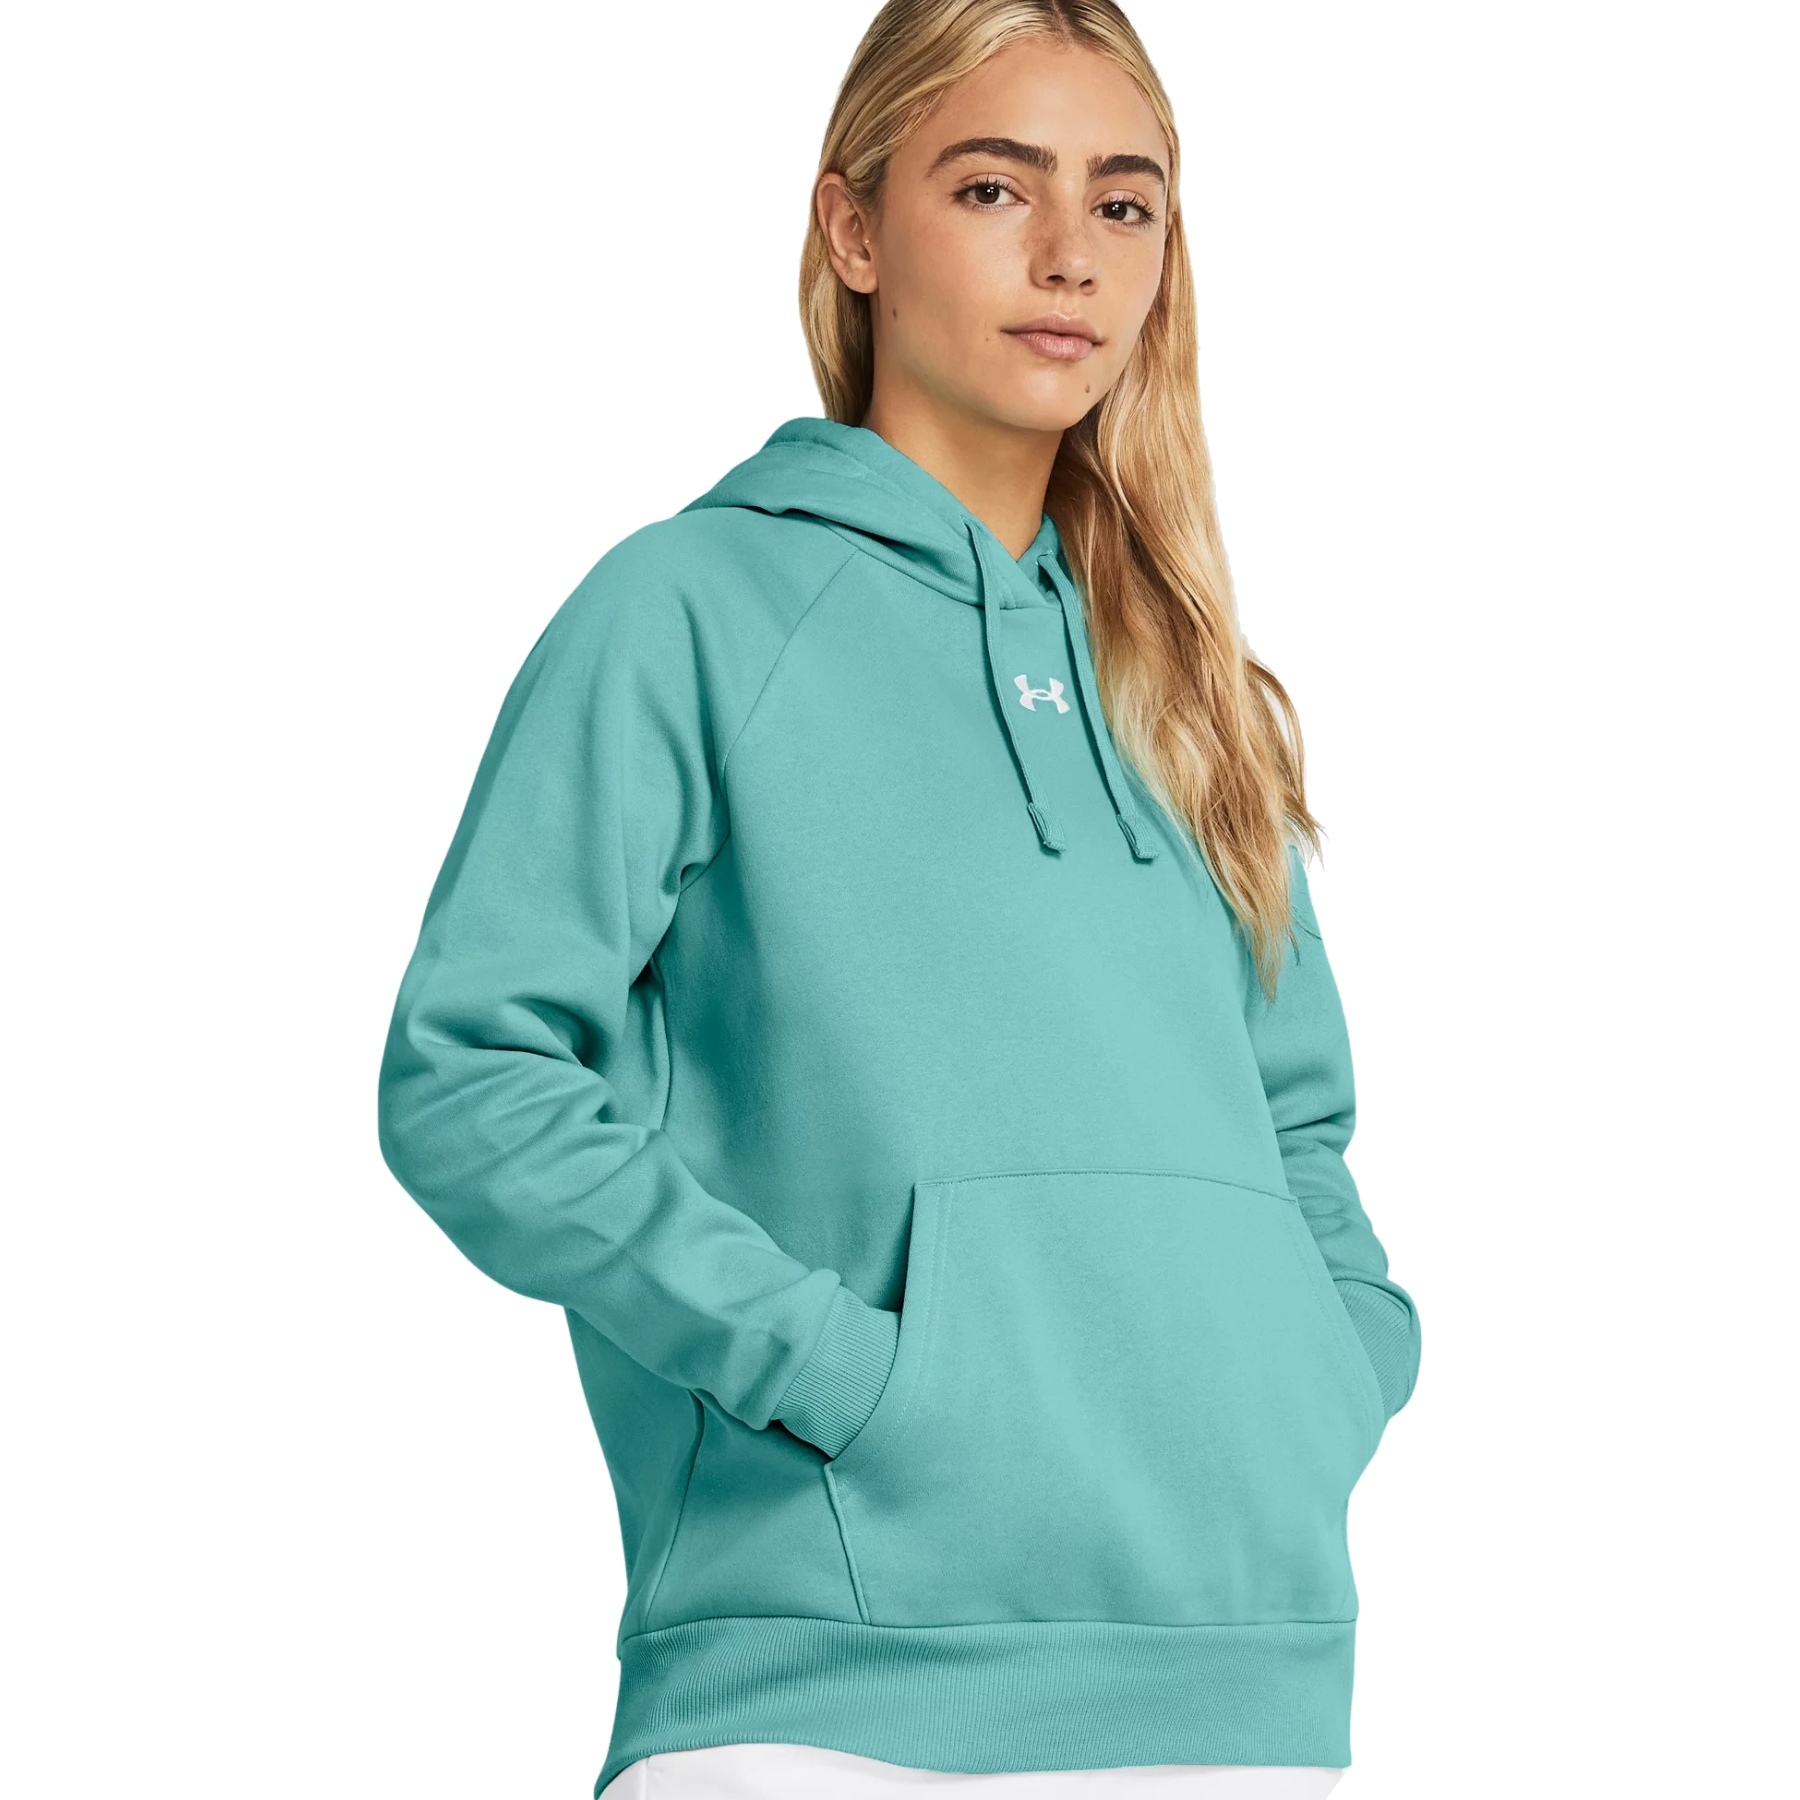 Image of Under Armour UA Rival Fleece Hoodie Women - Radial Turquoise/White